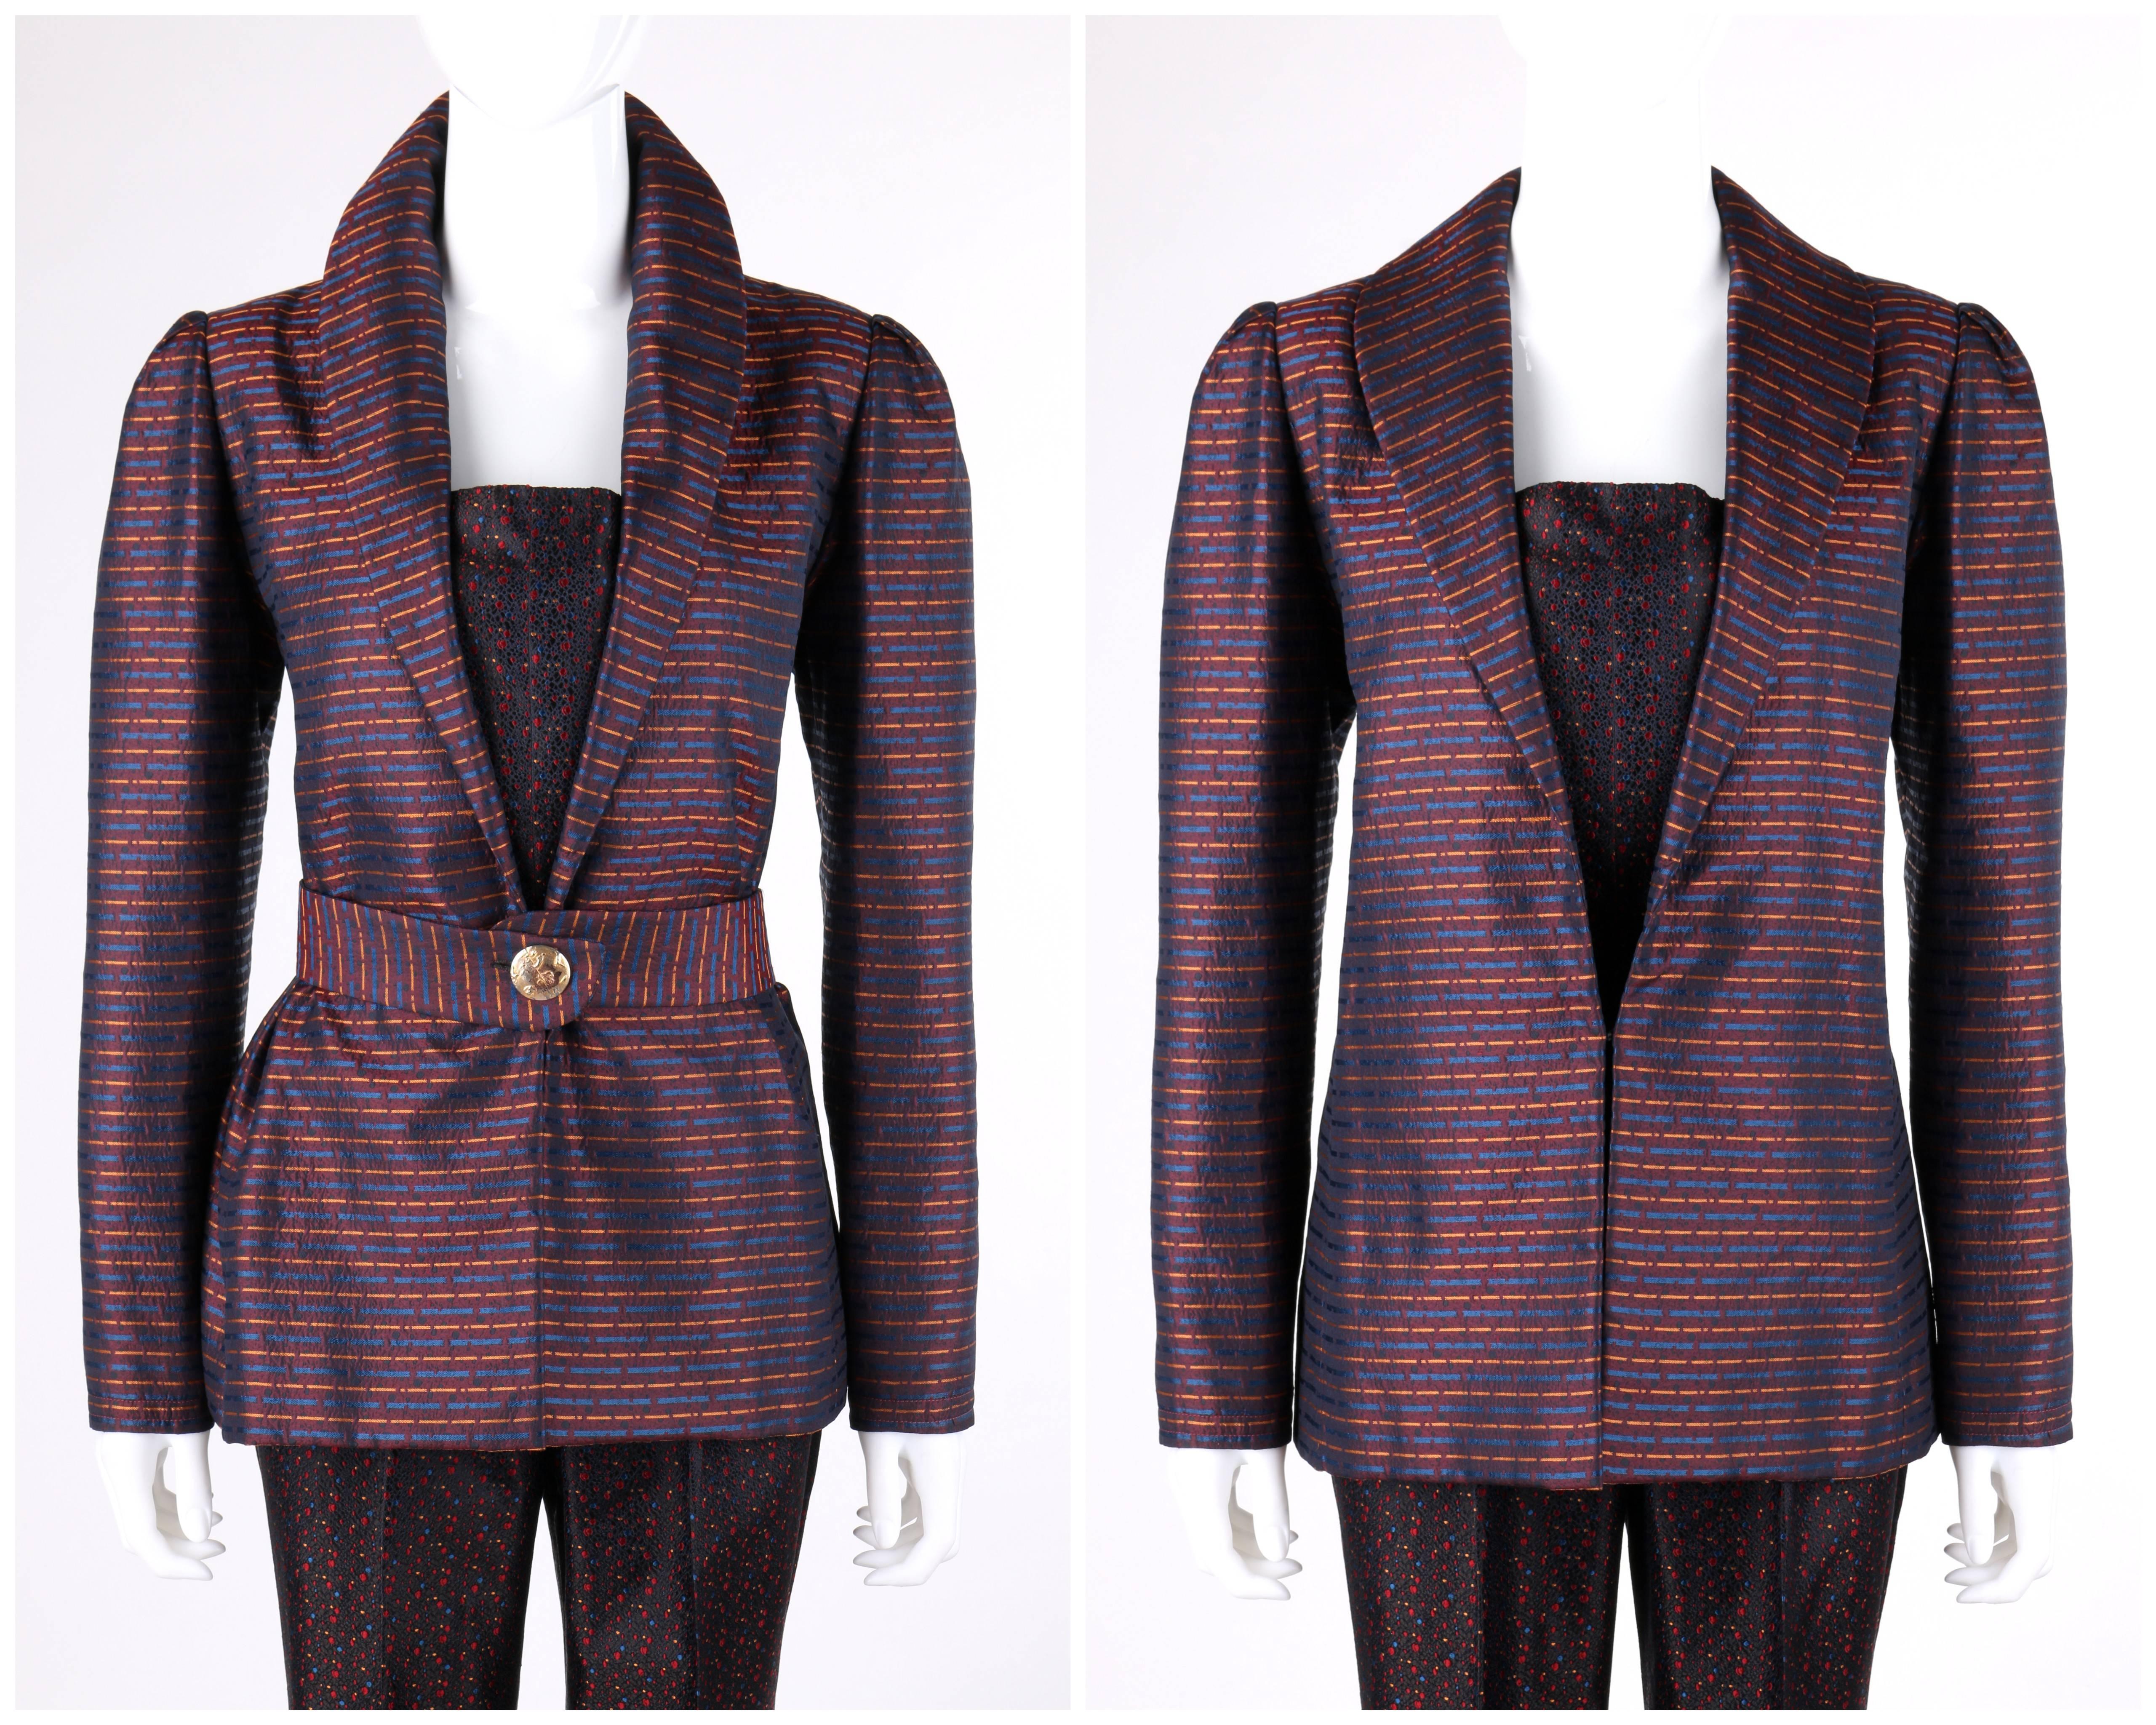 Vintage Irene Galitzine c.1960's couture three piece silk brocade belted blazer sleeveless jumpsuit / suit set. Maroon and black iridescent brocade with gold and blue dashed stripe and black dot pattern over top. Shawl collar blazer. Single hook and